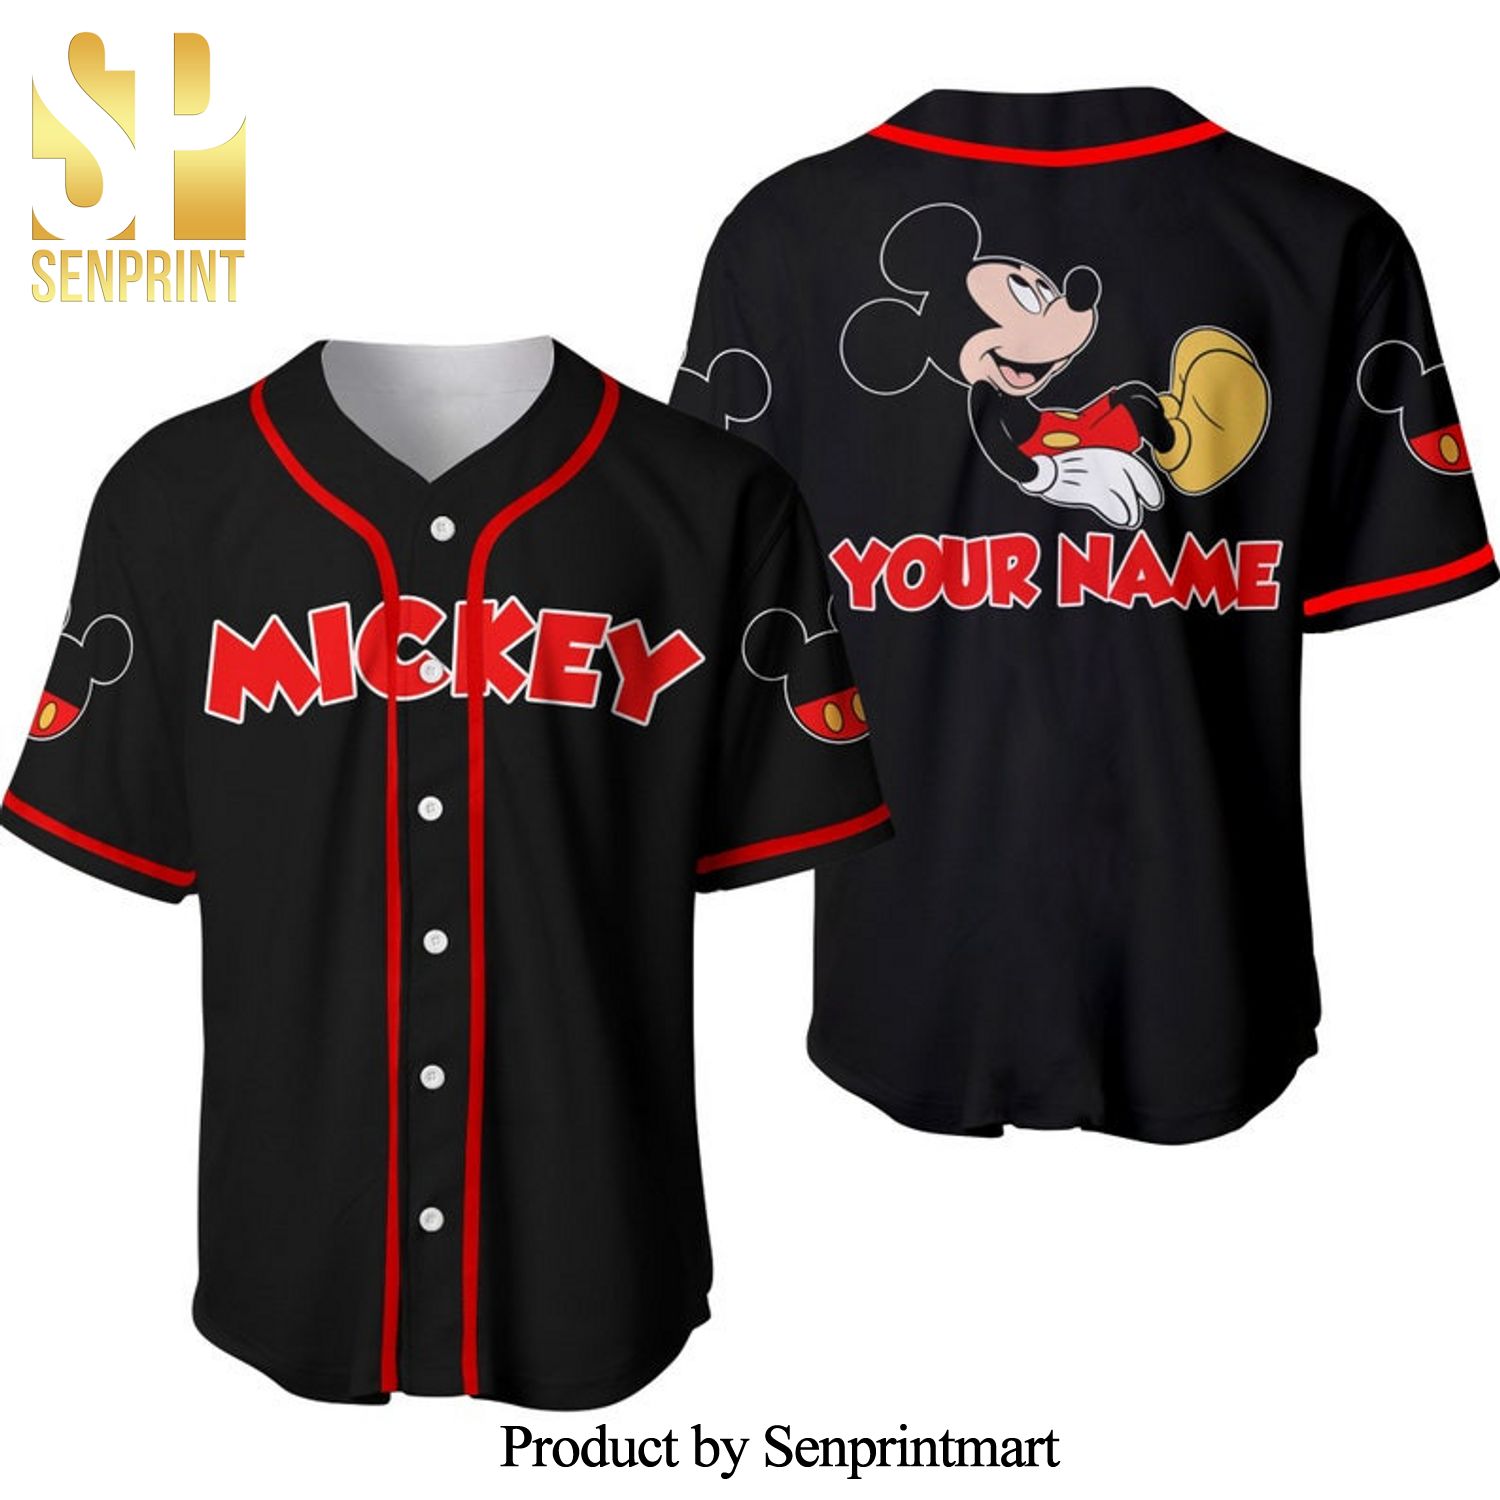 Personalized Chilling Mickey Mouse Disney All Over Print Baseball Jersey – Black